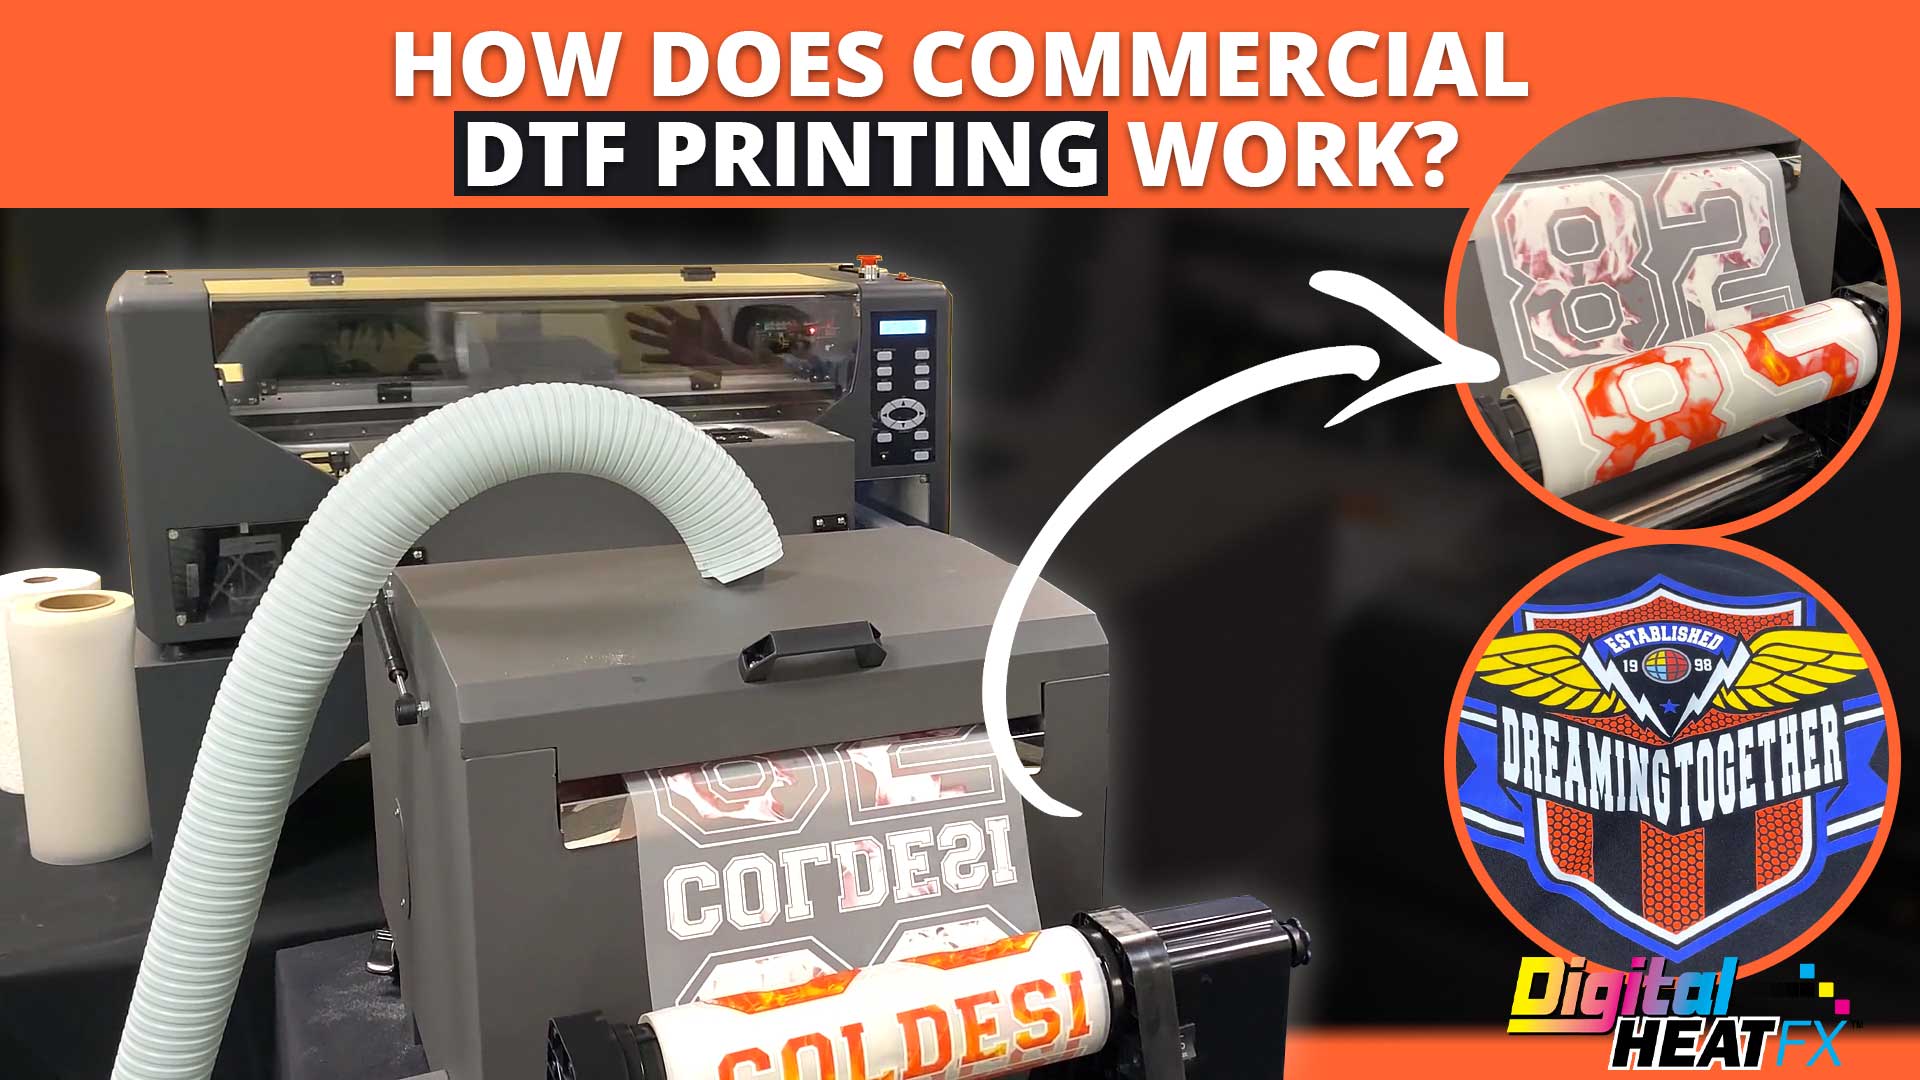 Video Connection | How Does Commercial DTF Printing Work?